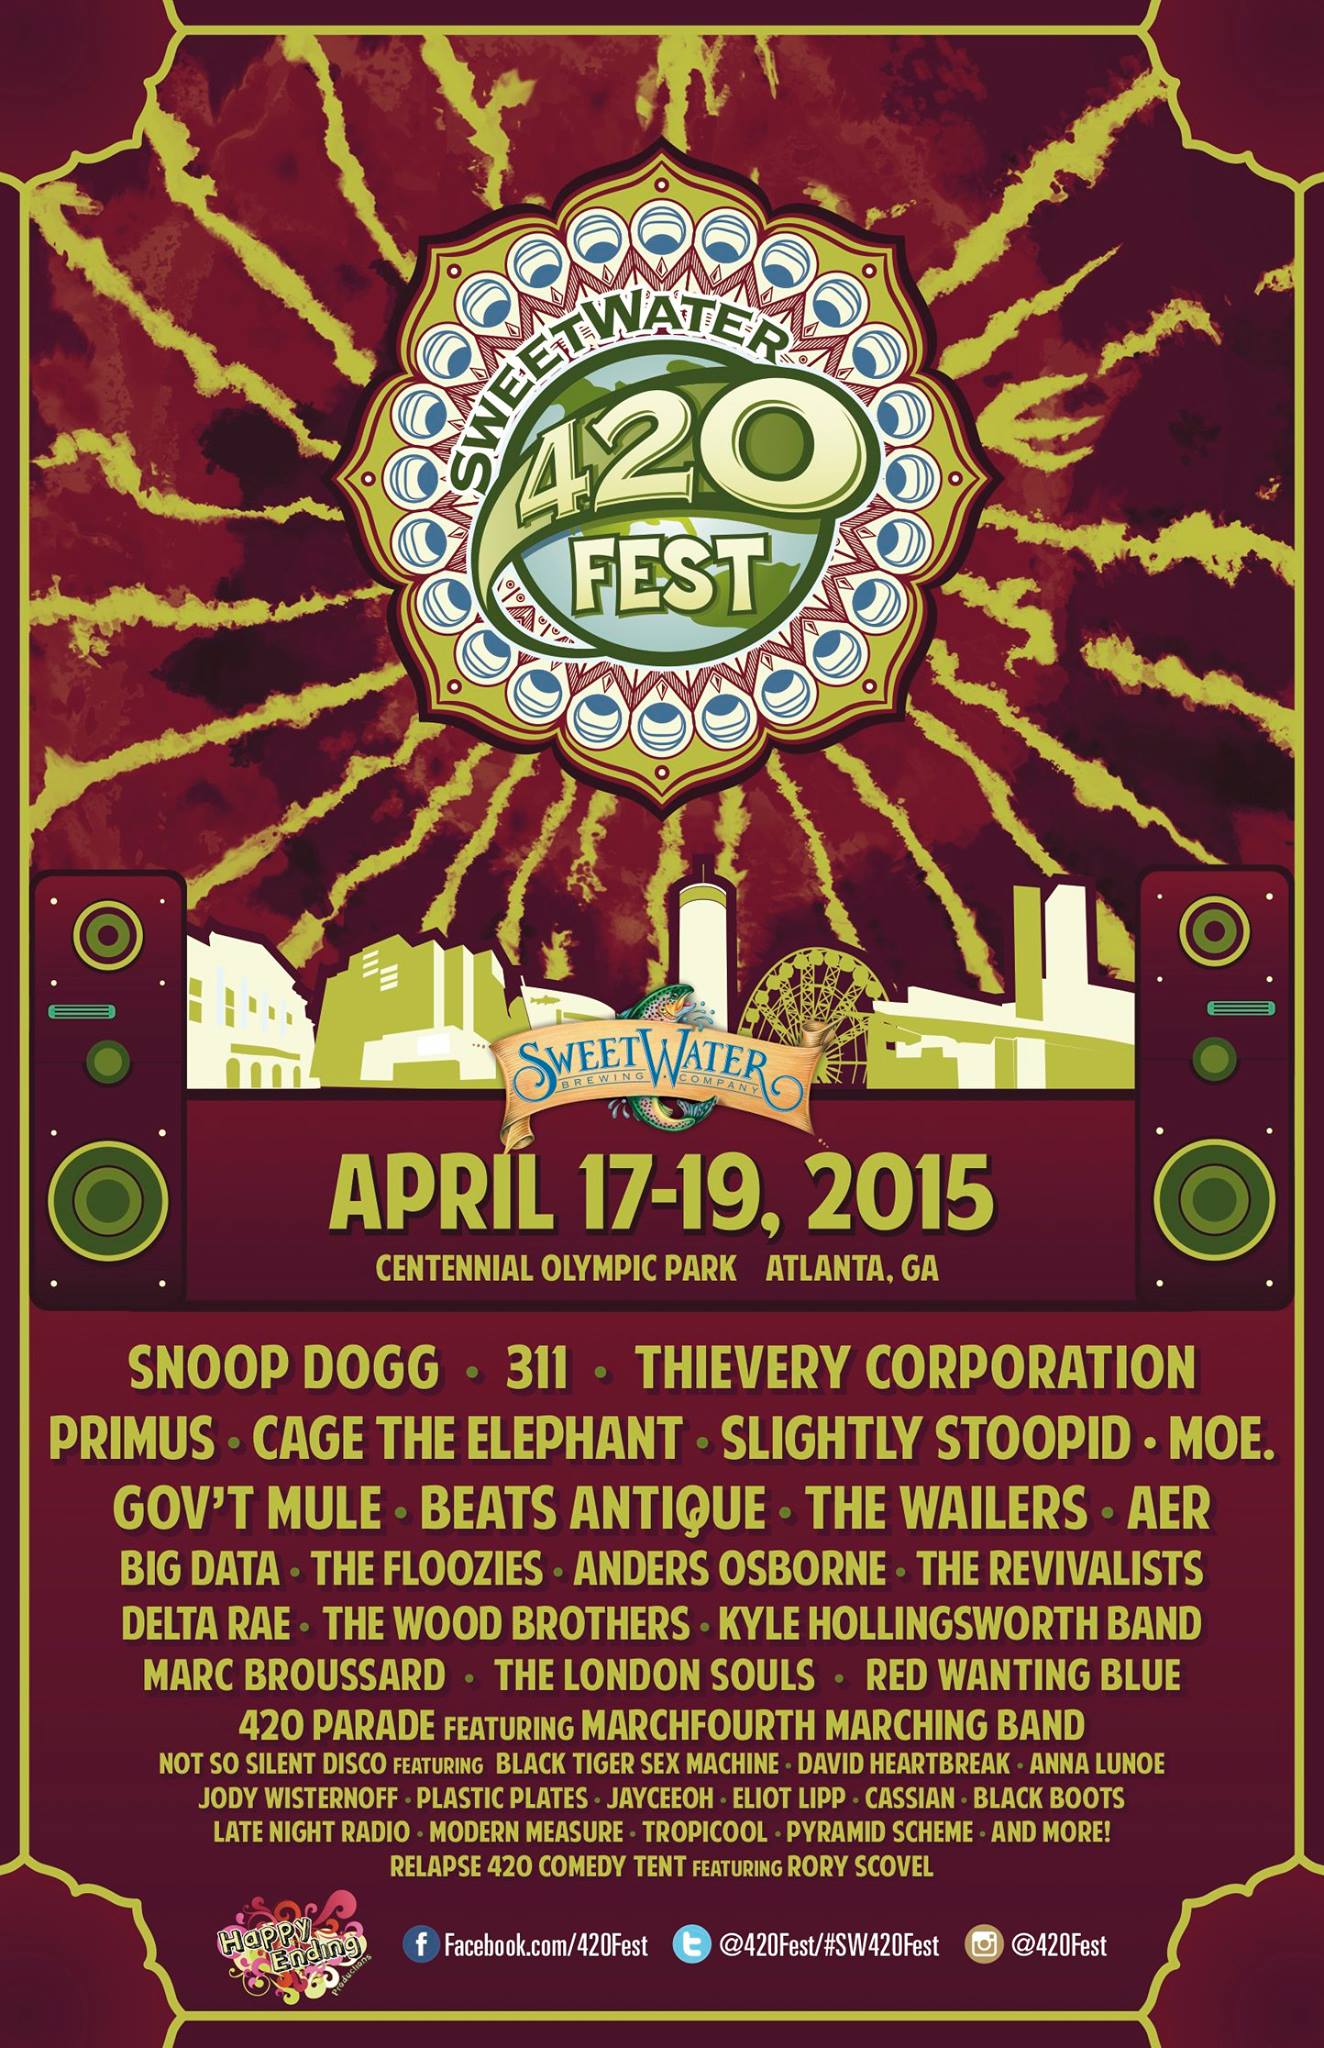 Full Sweetwater 420 Fest Lineup Announced!